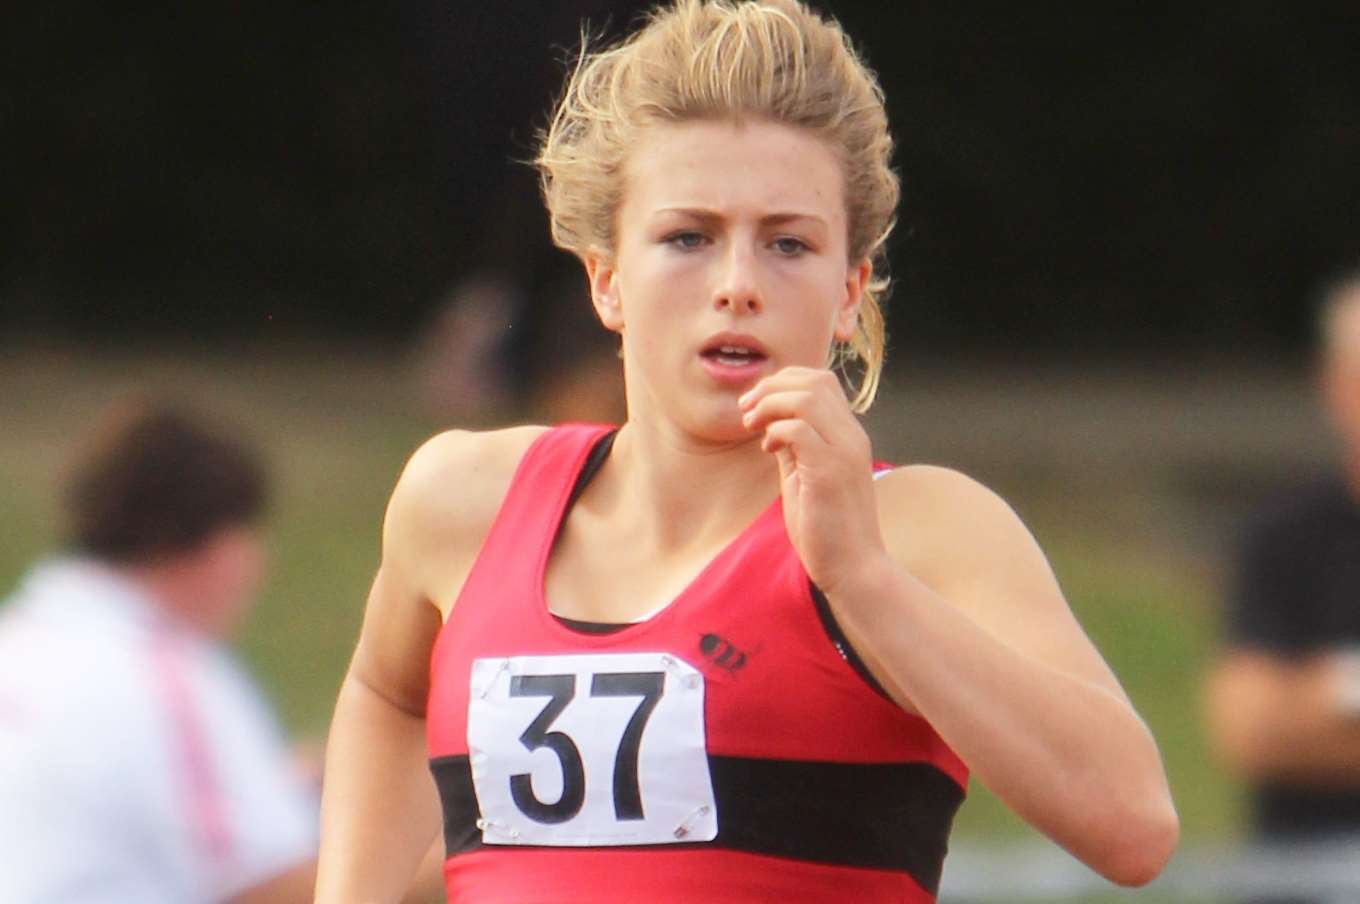 Medway and Maidstone's Harriet Day was among the Kent athletes at Bedford